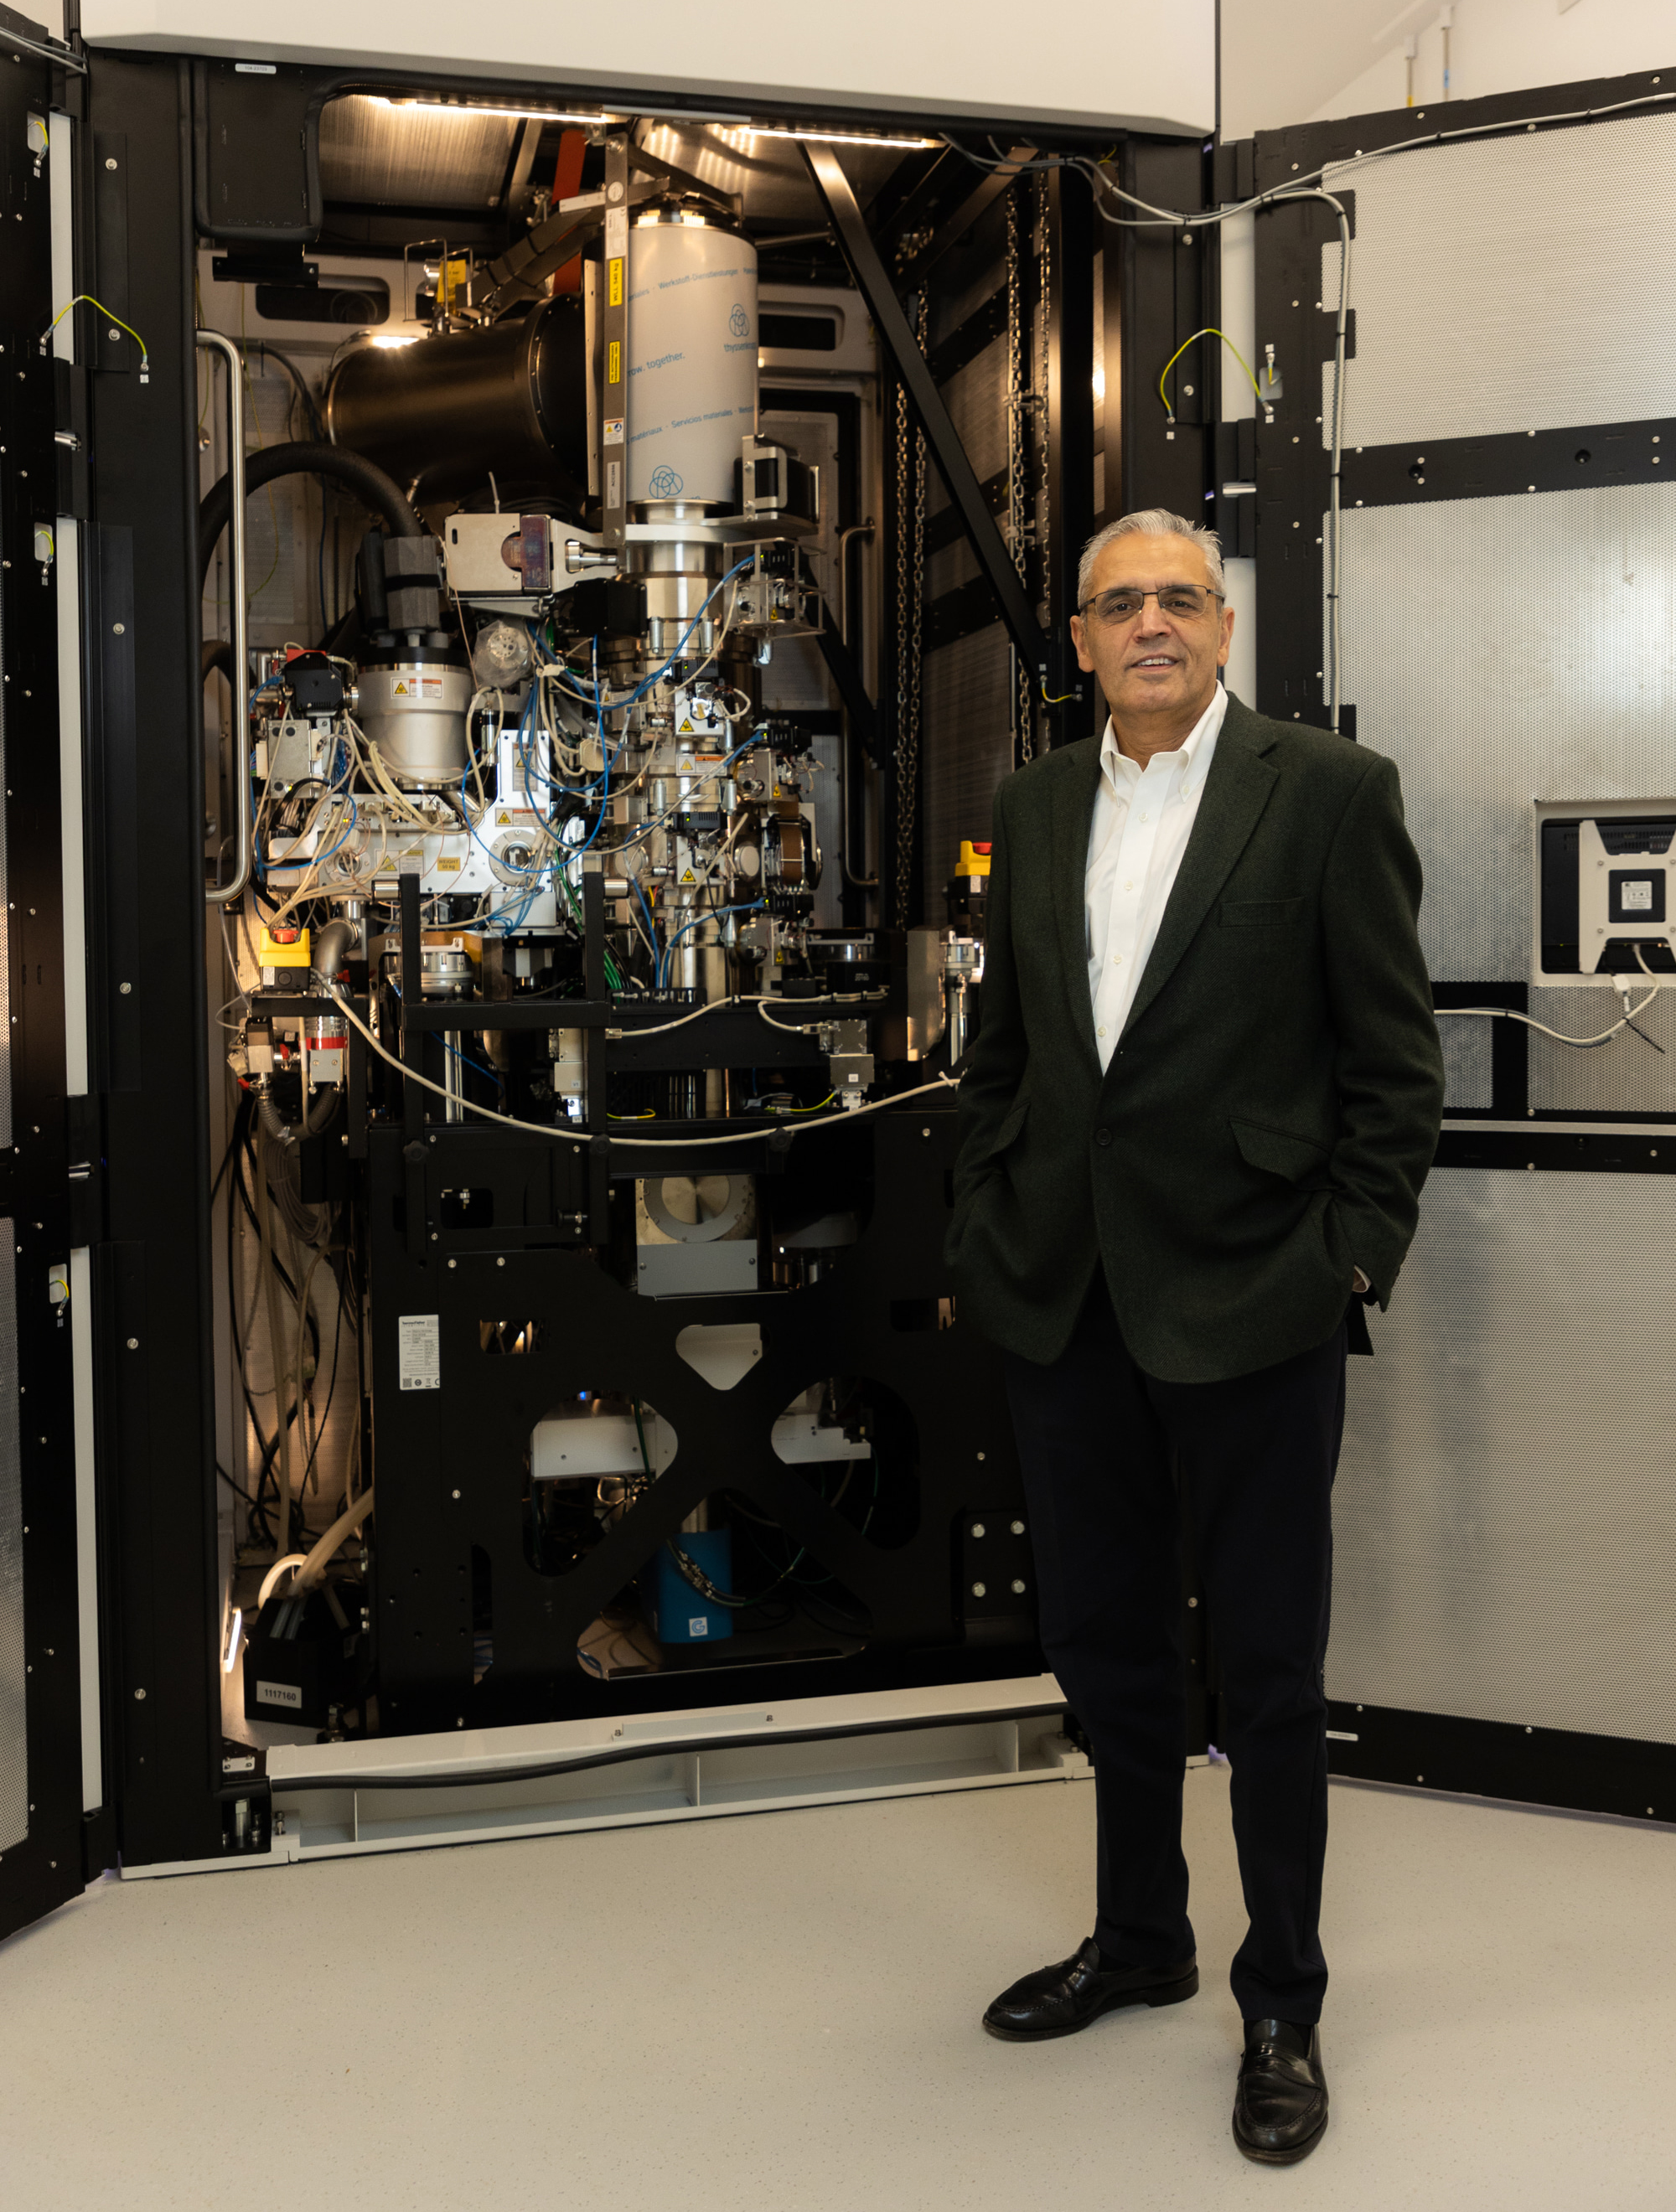 Harren Jhoti CEO Astex Pharmaceuticals (UK) with CryoEM facility used in drug discovery - copyright Astex  Pharmaceuticals (UK) Dec 2022